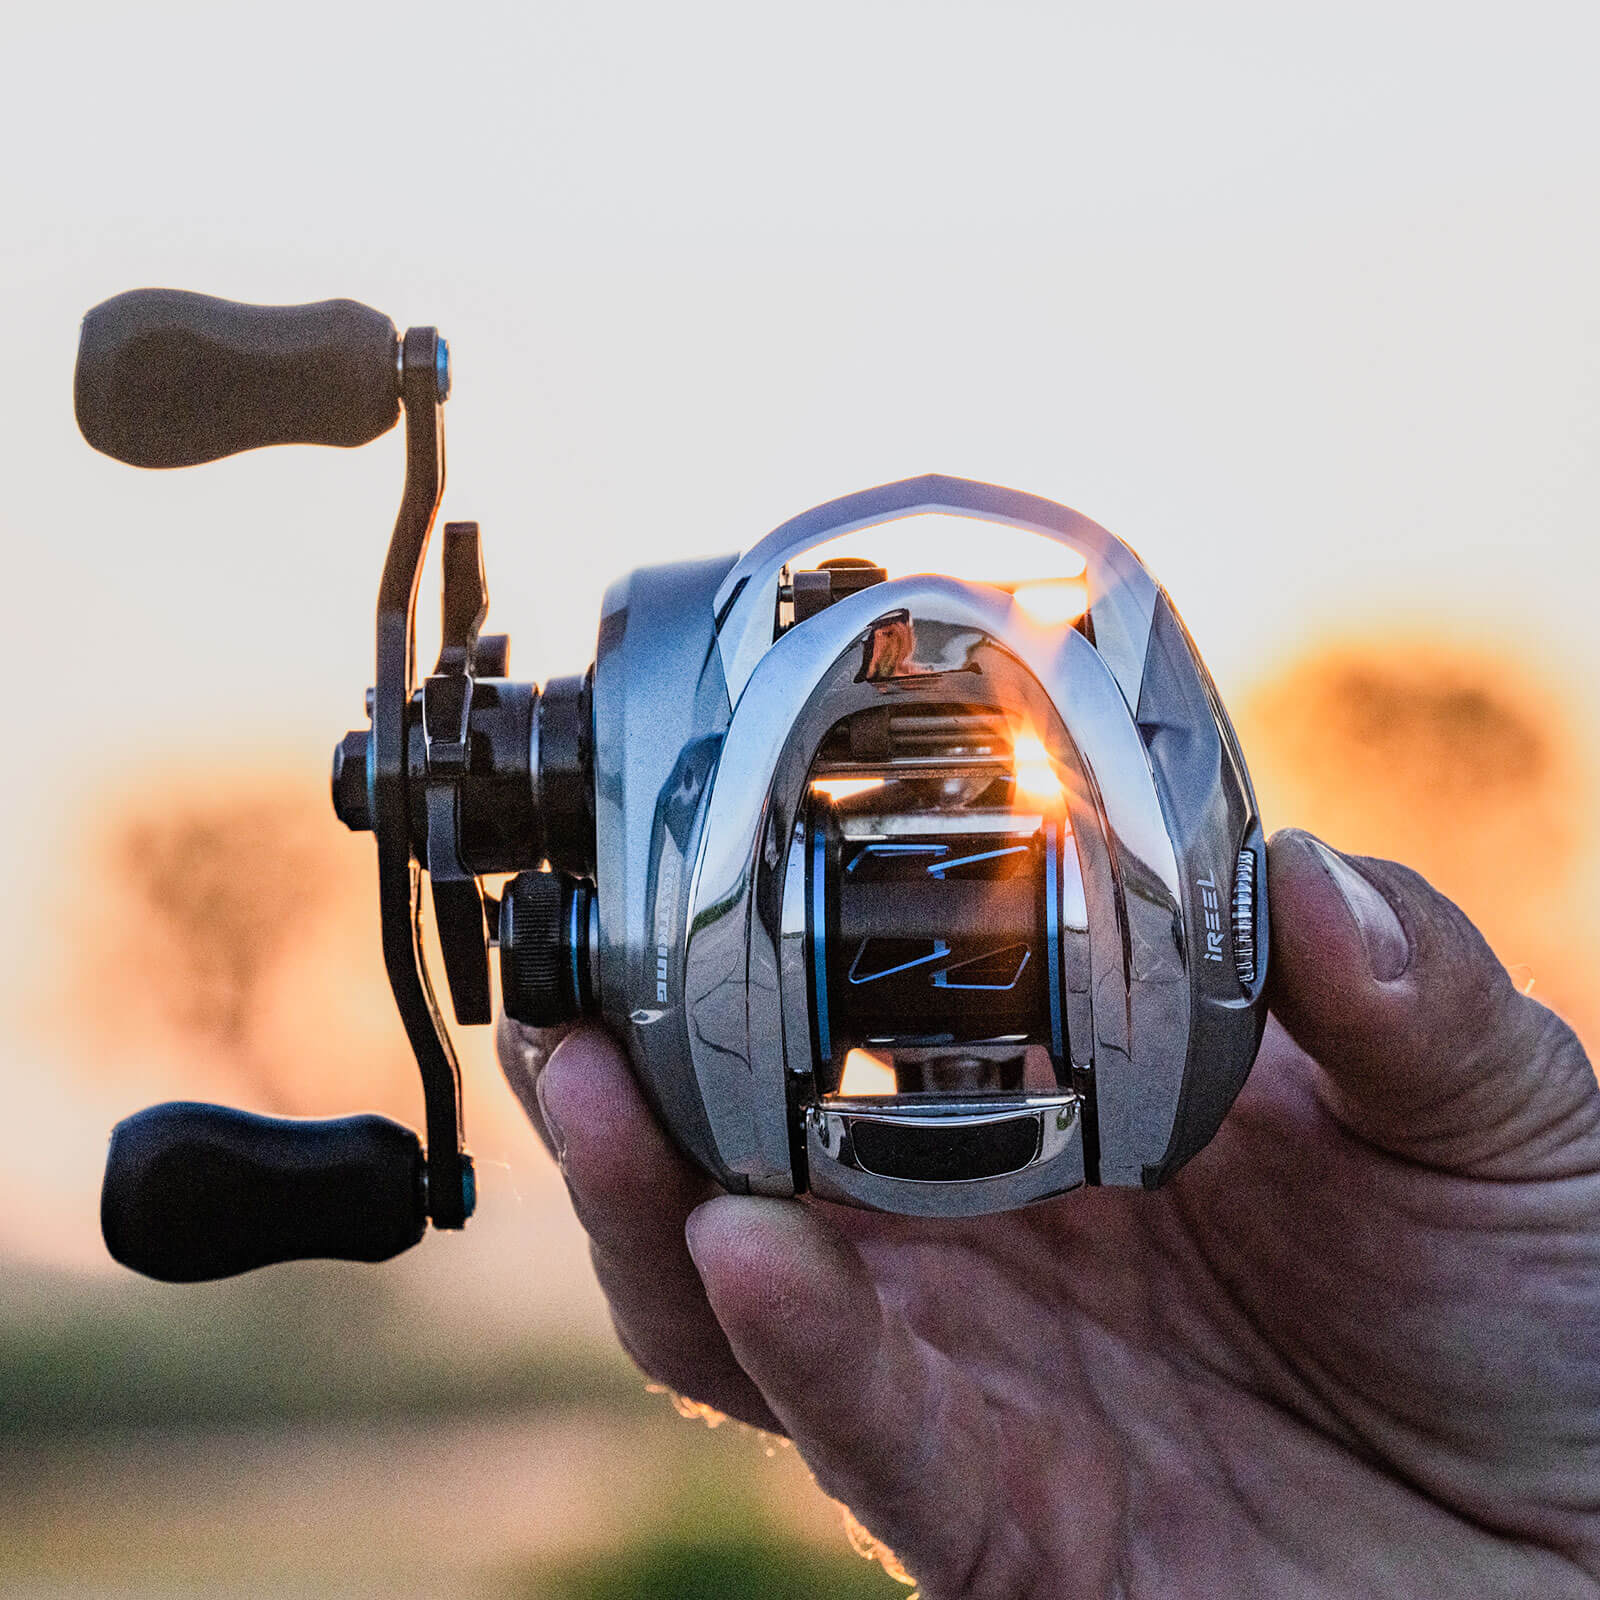 iReel One Wows DAIWA at ICAST: The Ultimate Fishing Tech Showdown